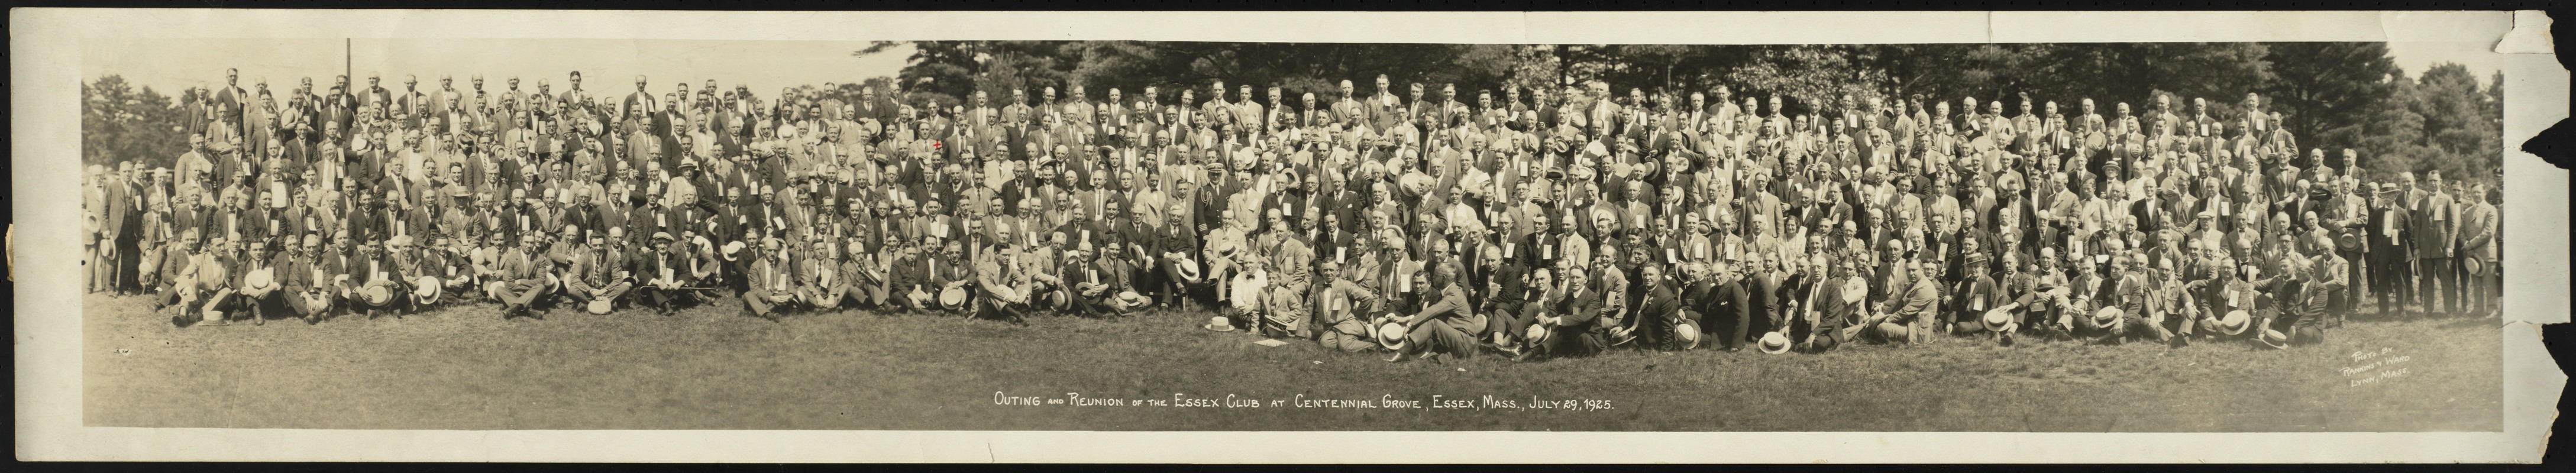 Outing and reunion of the Essex Club at Centennial Grove